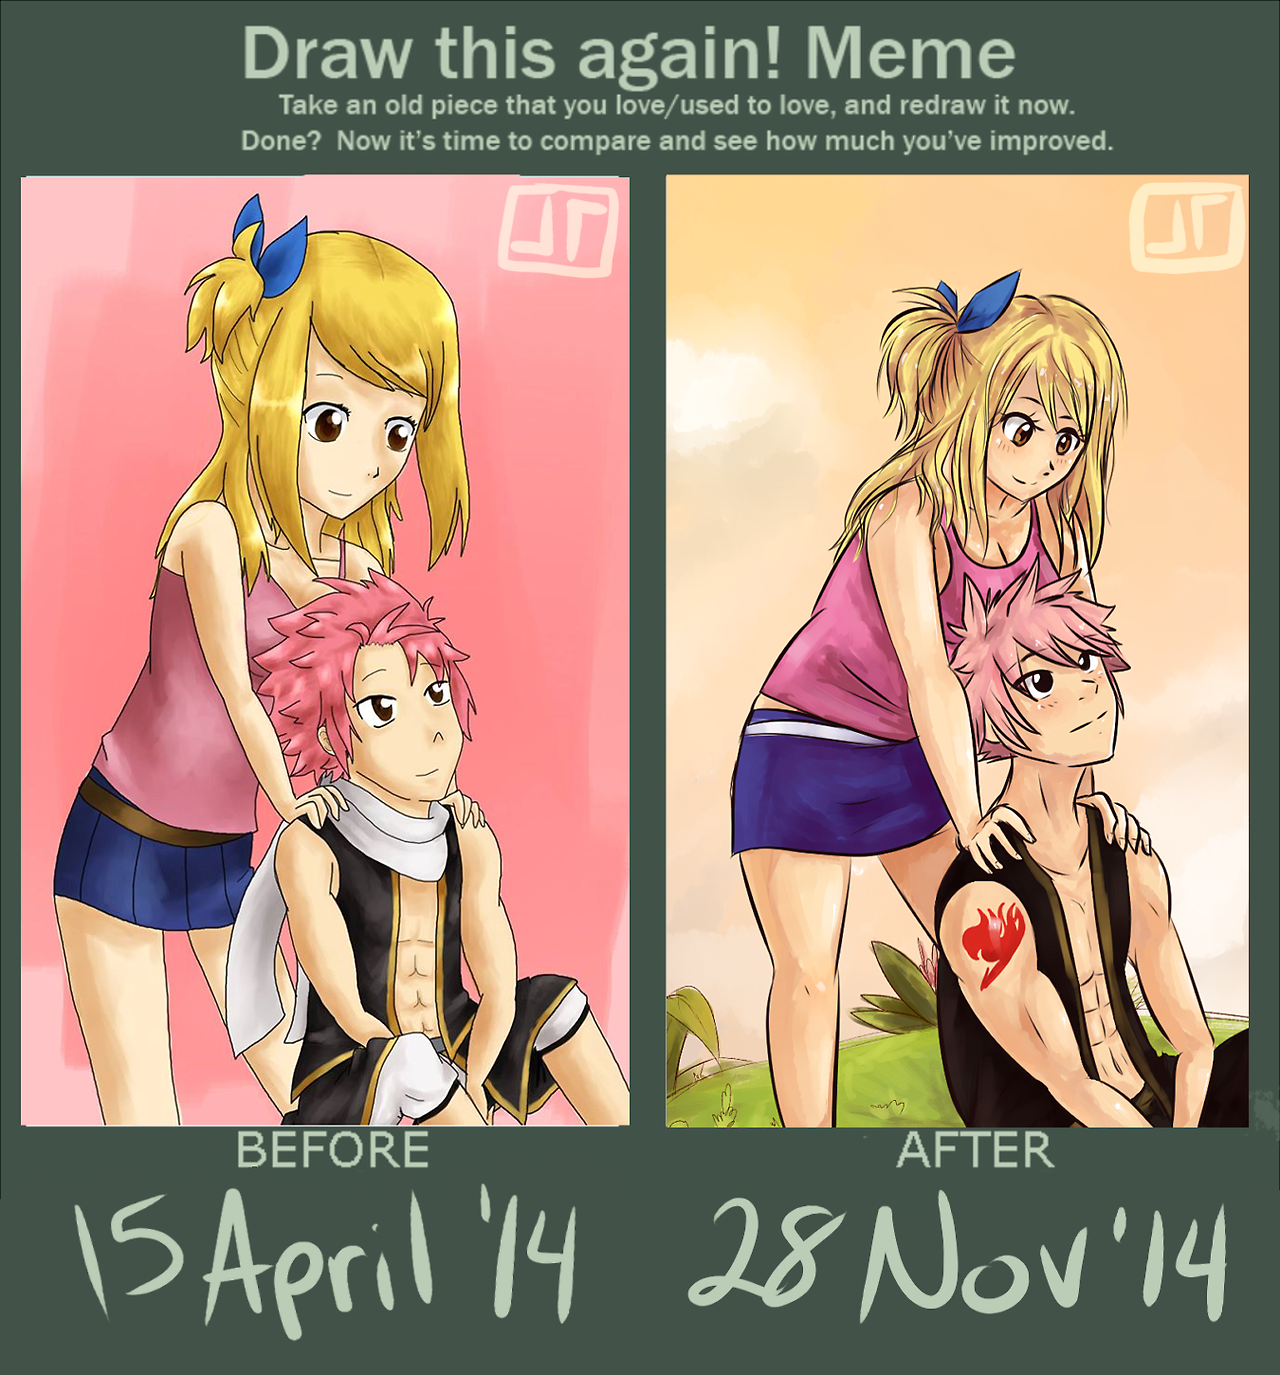 Natsu And Lucy Draw This Again Meme By Nandronjay On DeviantArt.